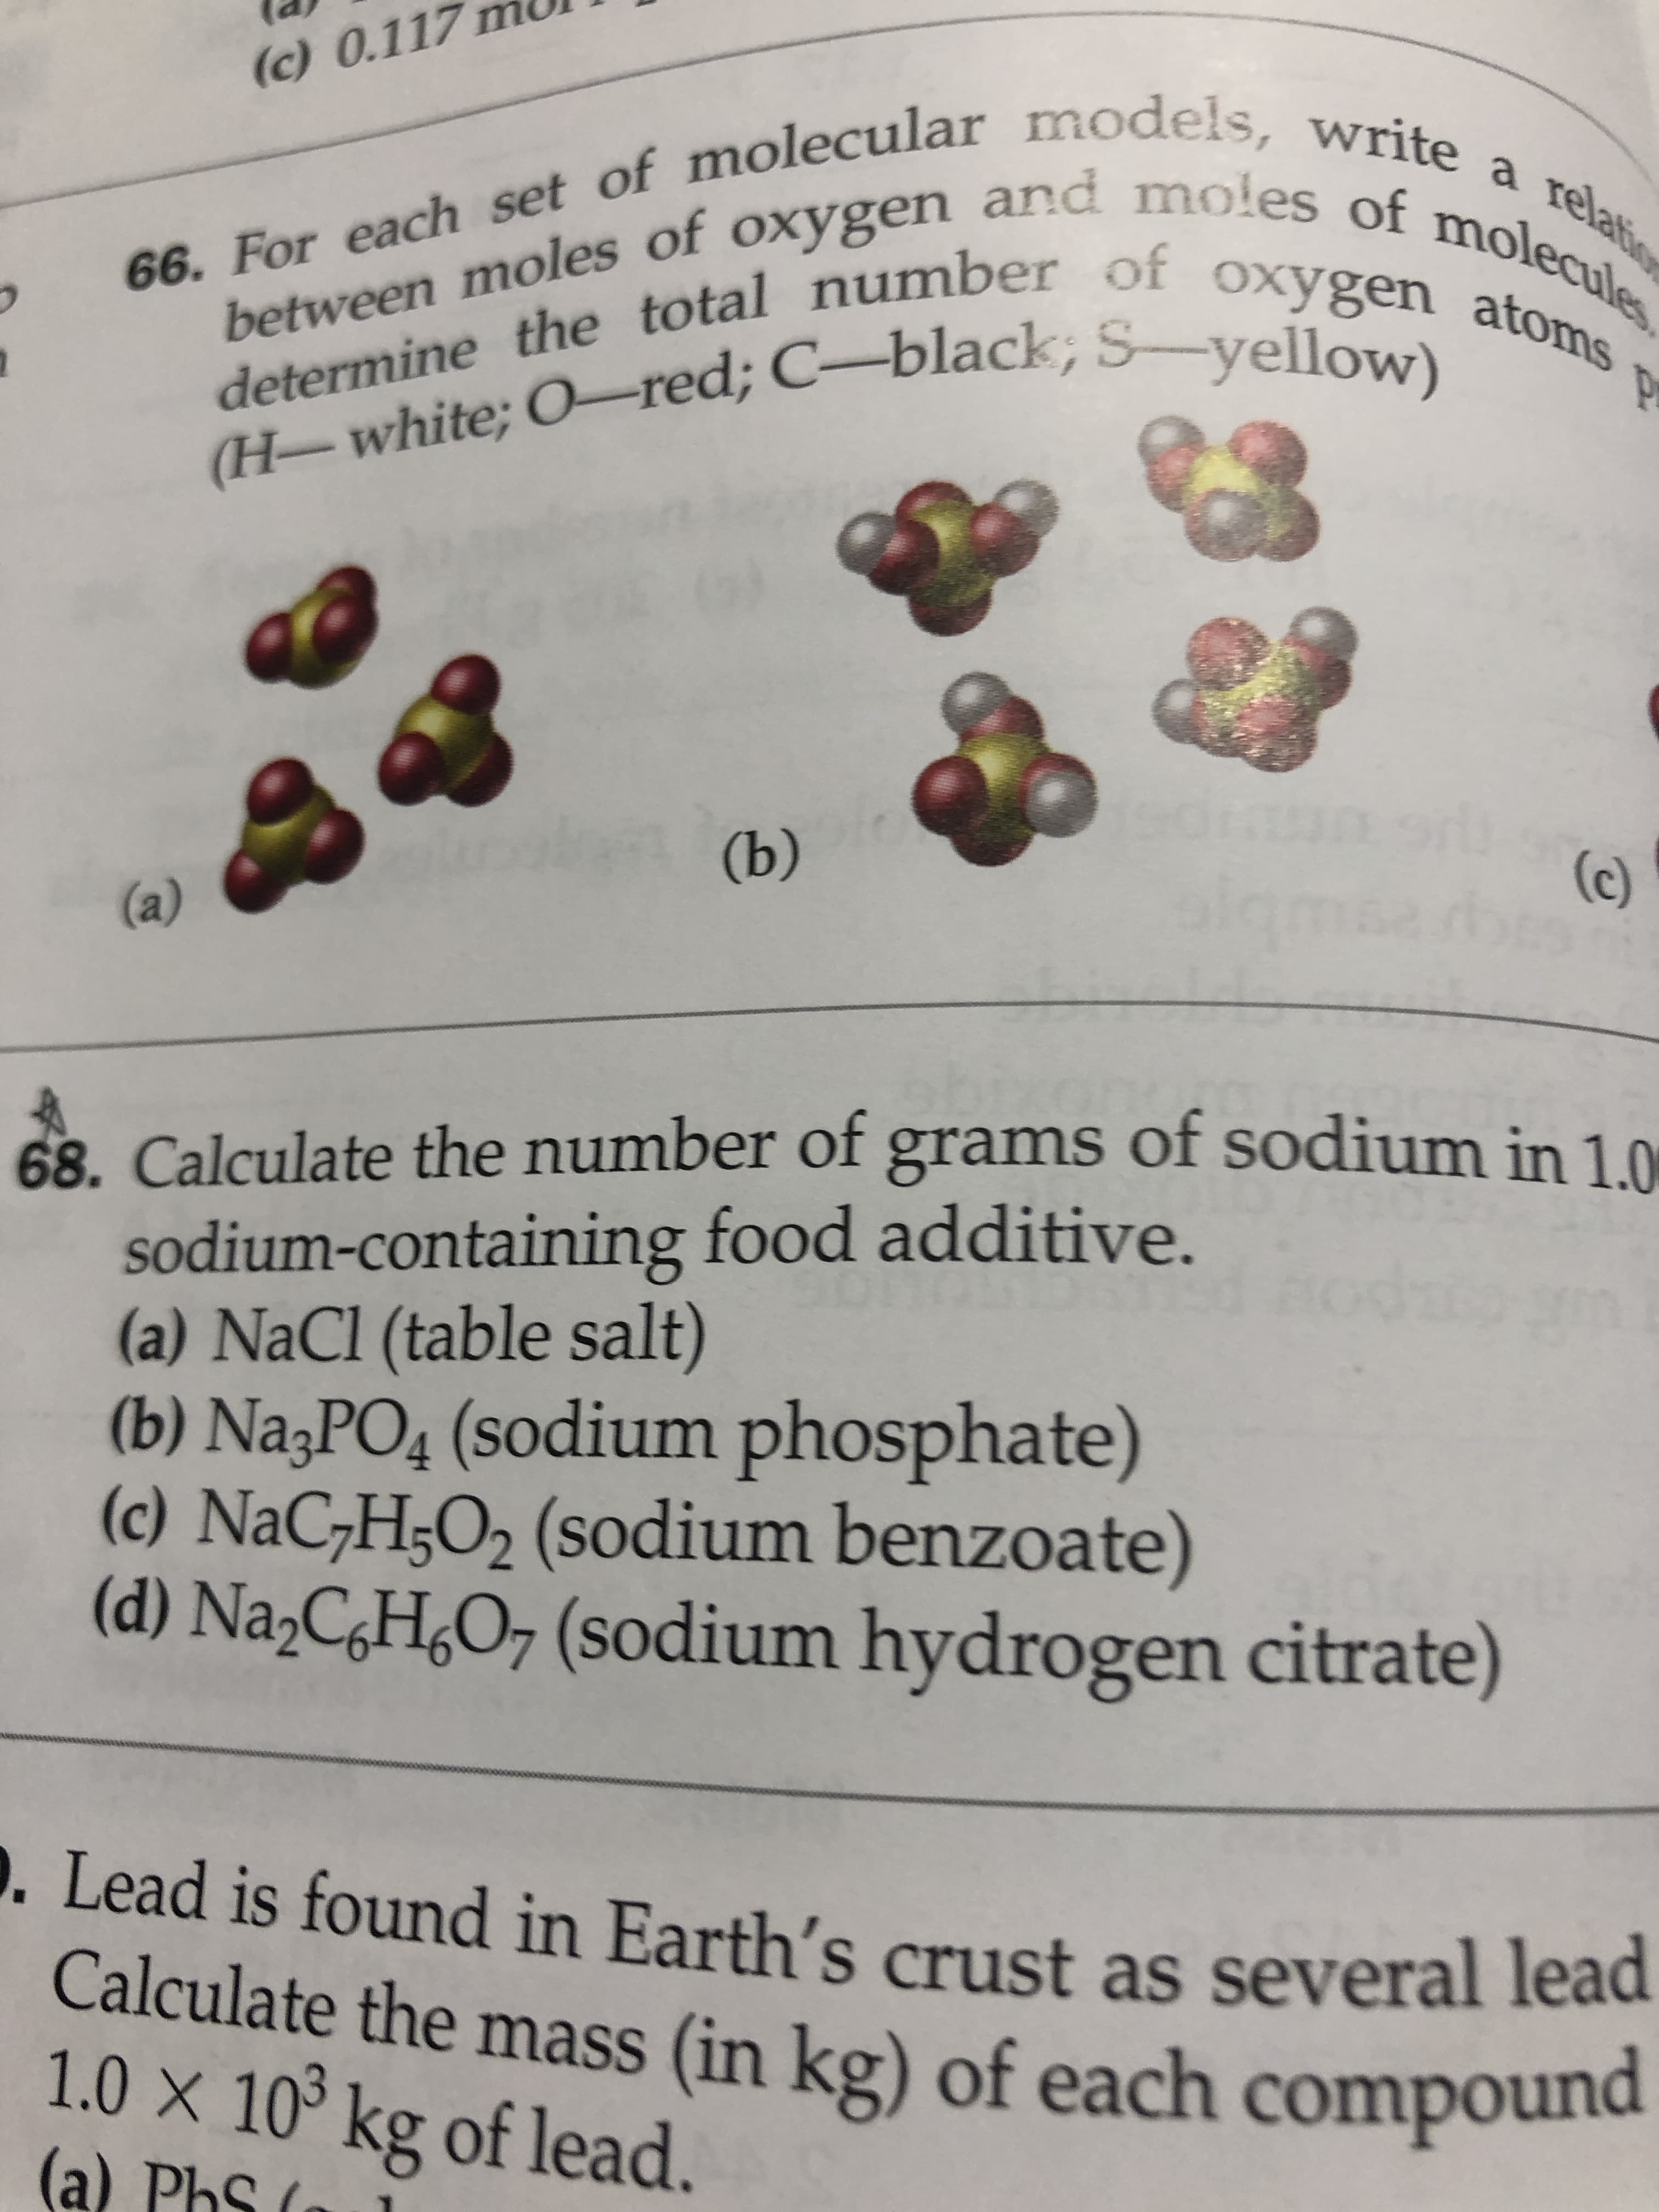 (c) 0.117
66. For each set of molecular models, write a relatio
determine the total number of oxygen atoms
les
(H-white; O-red; C-black; S-yellow).
(b)
(c)
(a)
grams of sodium in 1.0
68. Calculate the number of
sodium-containing food additive.
(a) NaCl (table salt)
(b) Na3PO4 (sodium phosphate)
(c) NaC;H;O2 (sodium benzoate)
(d) Na,C¿H¿O7 (sodium hydrogen citrate)
D. Lead is found in Earth's crust as several lead
Calculate the mass (in kg) of each compound
1.0 X 10 kg of lead.
(a) PhS (
